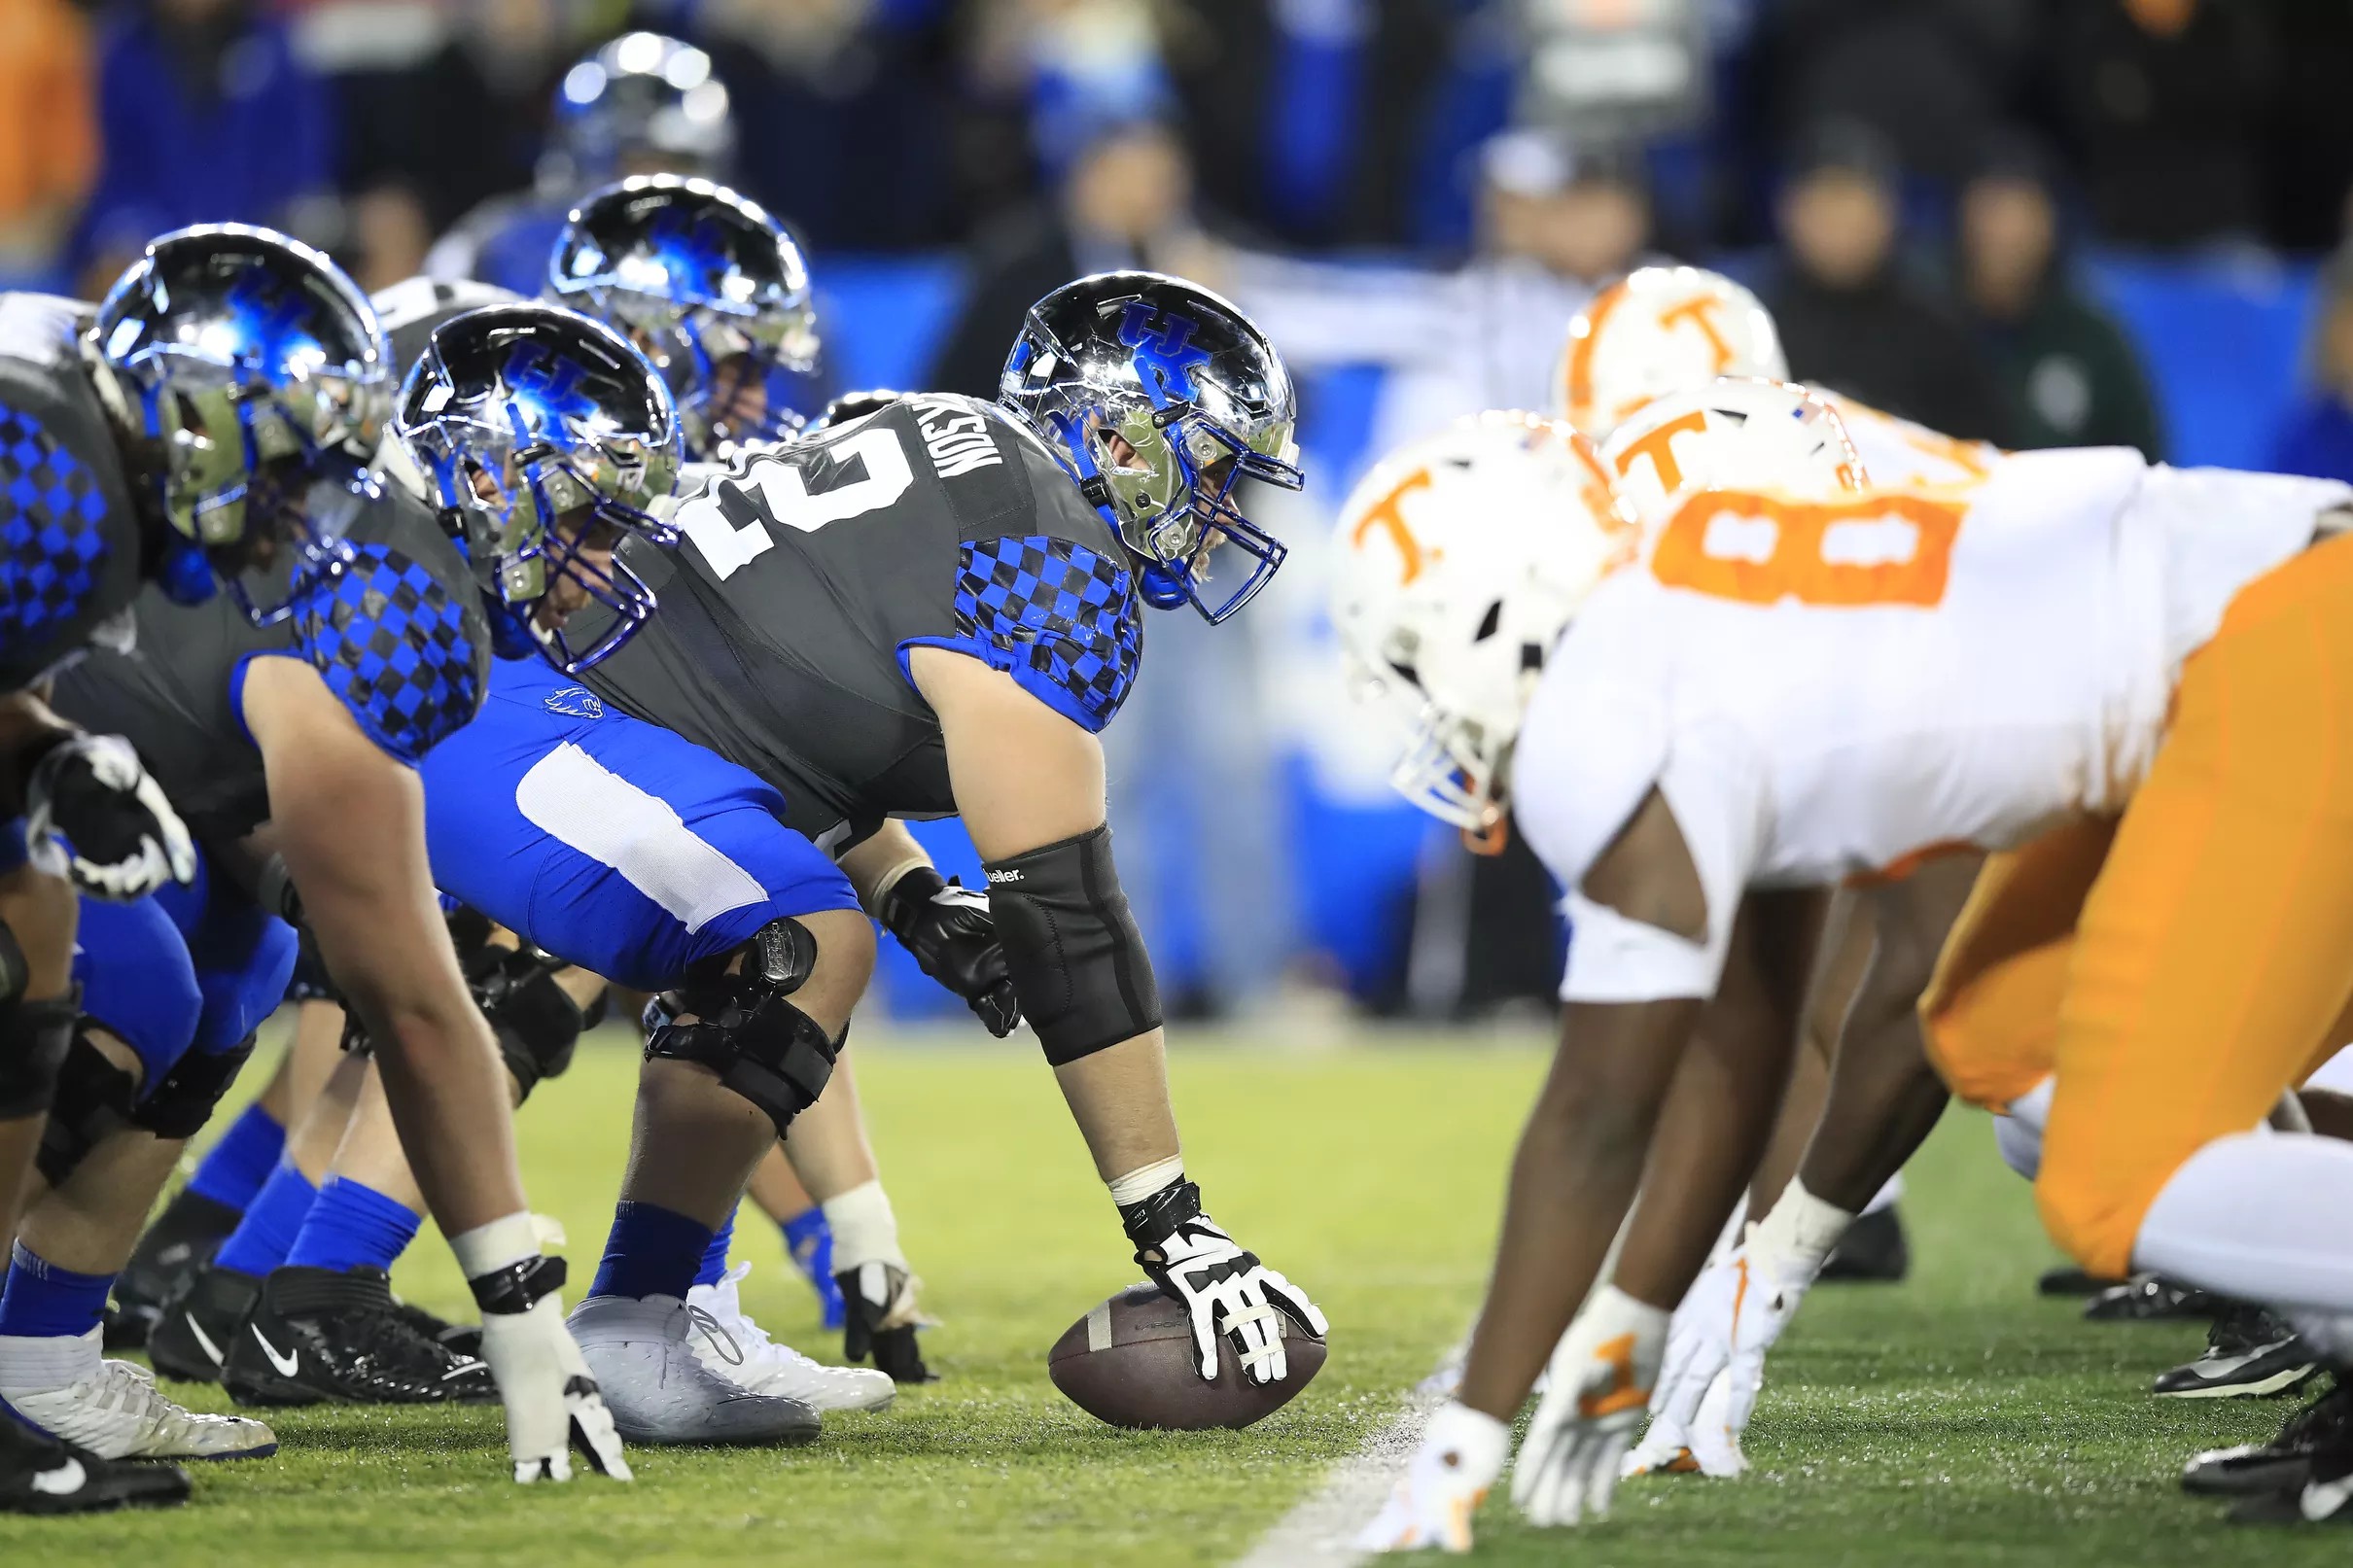 Kentucky vs. Tennessee start time and TV info announced